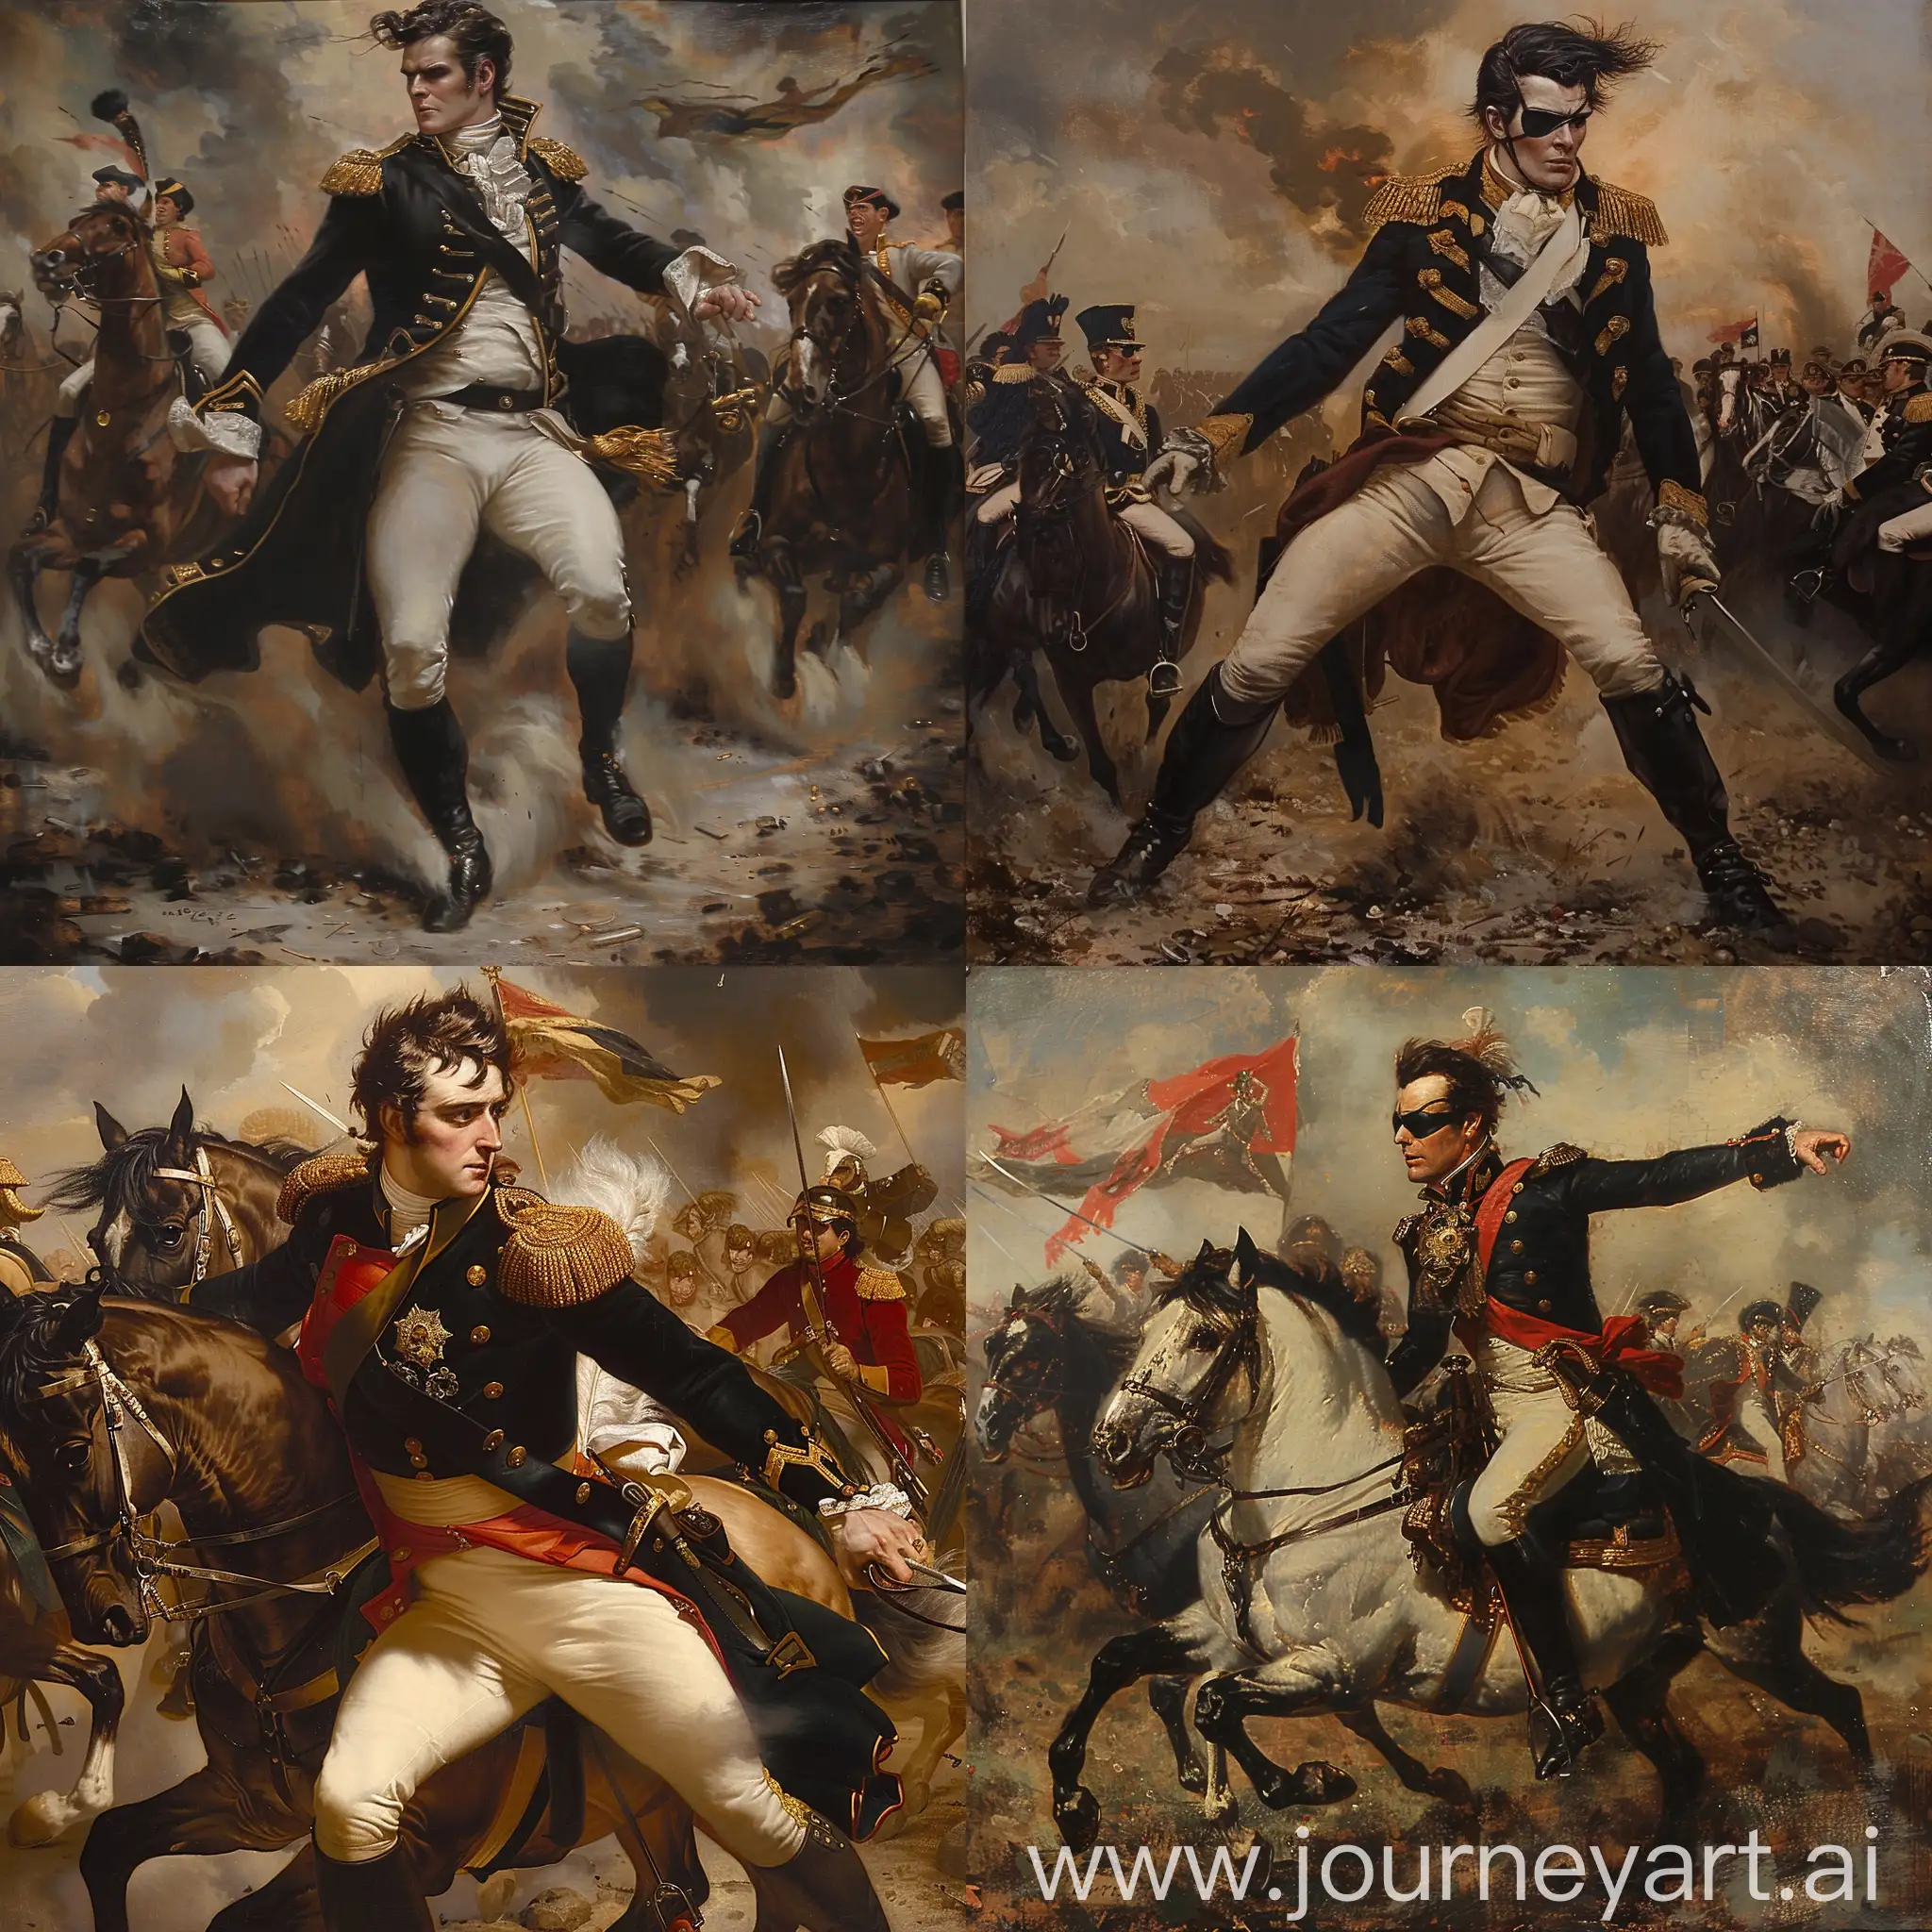 Napoleonic-White-Brunette-Male-Cavalry-Leader-in-Dramatic-Charge